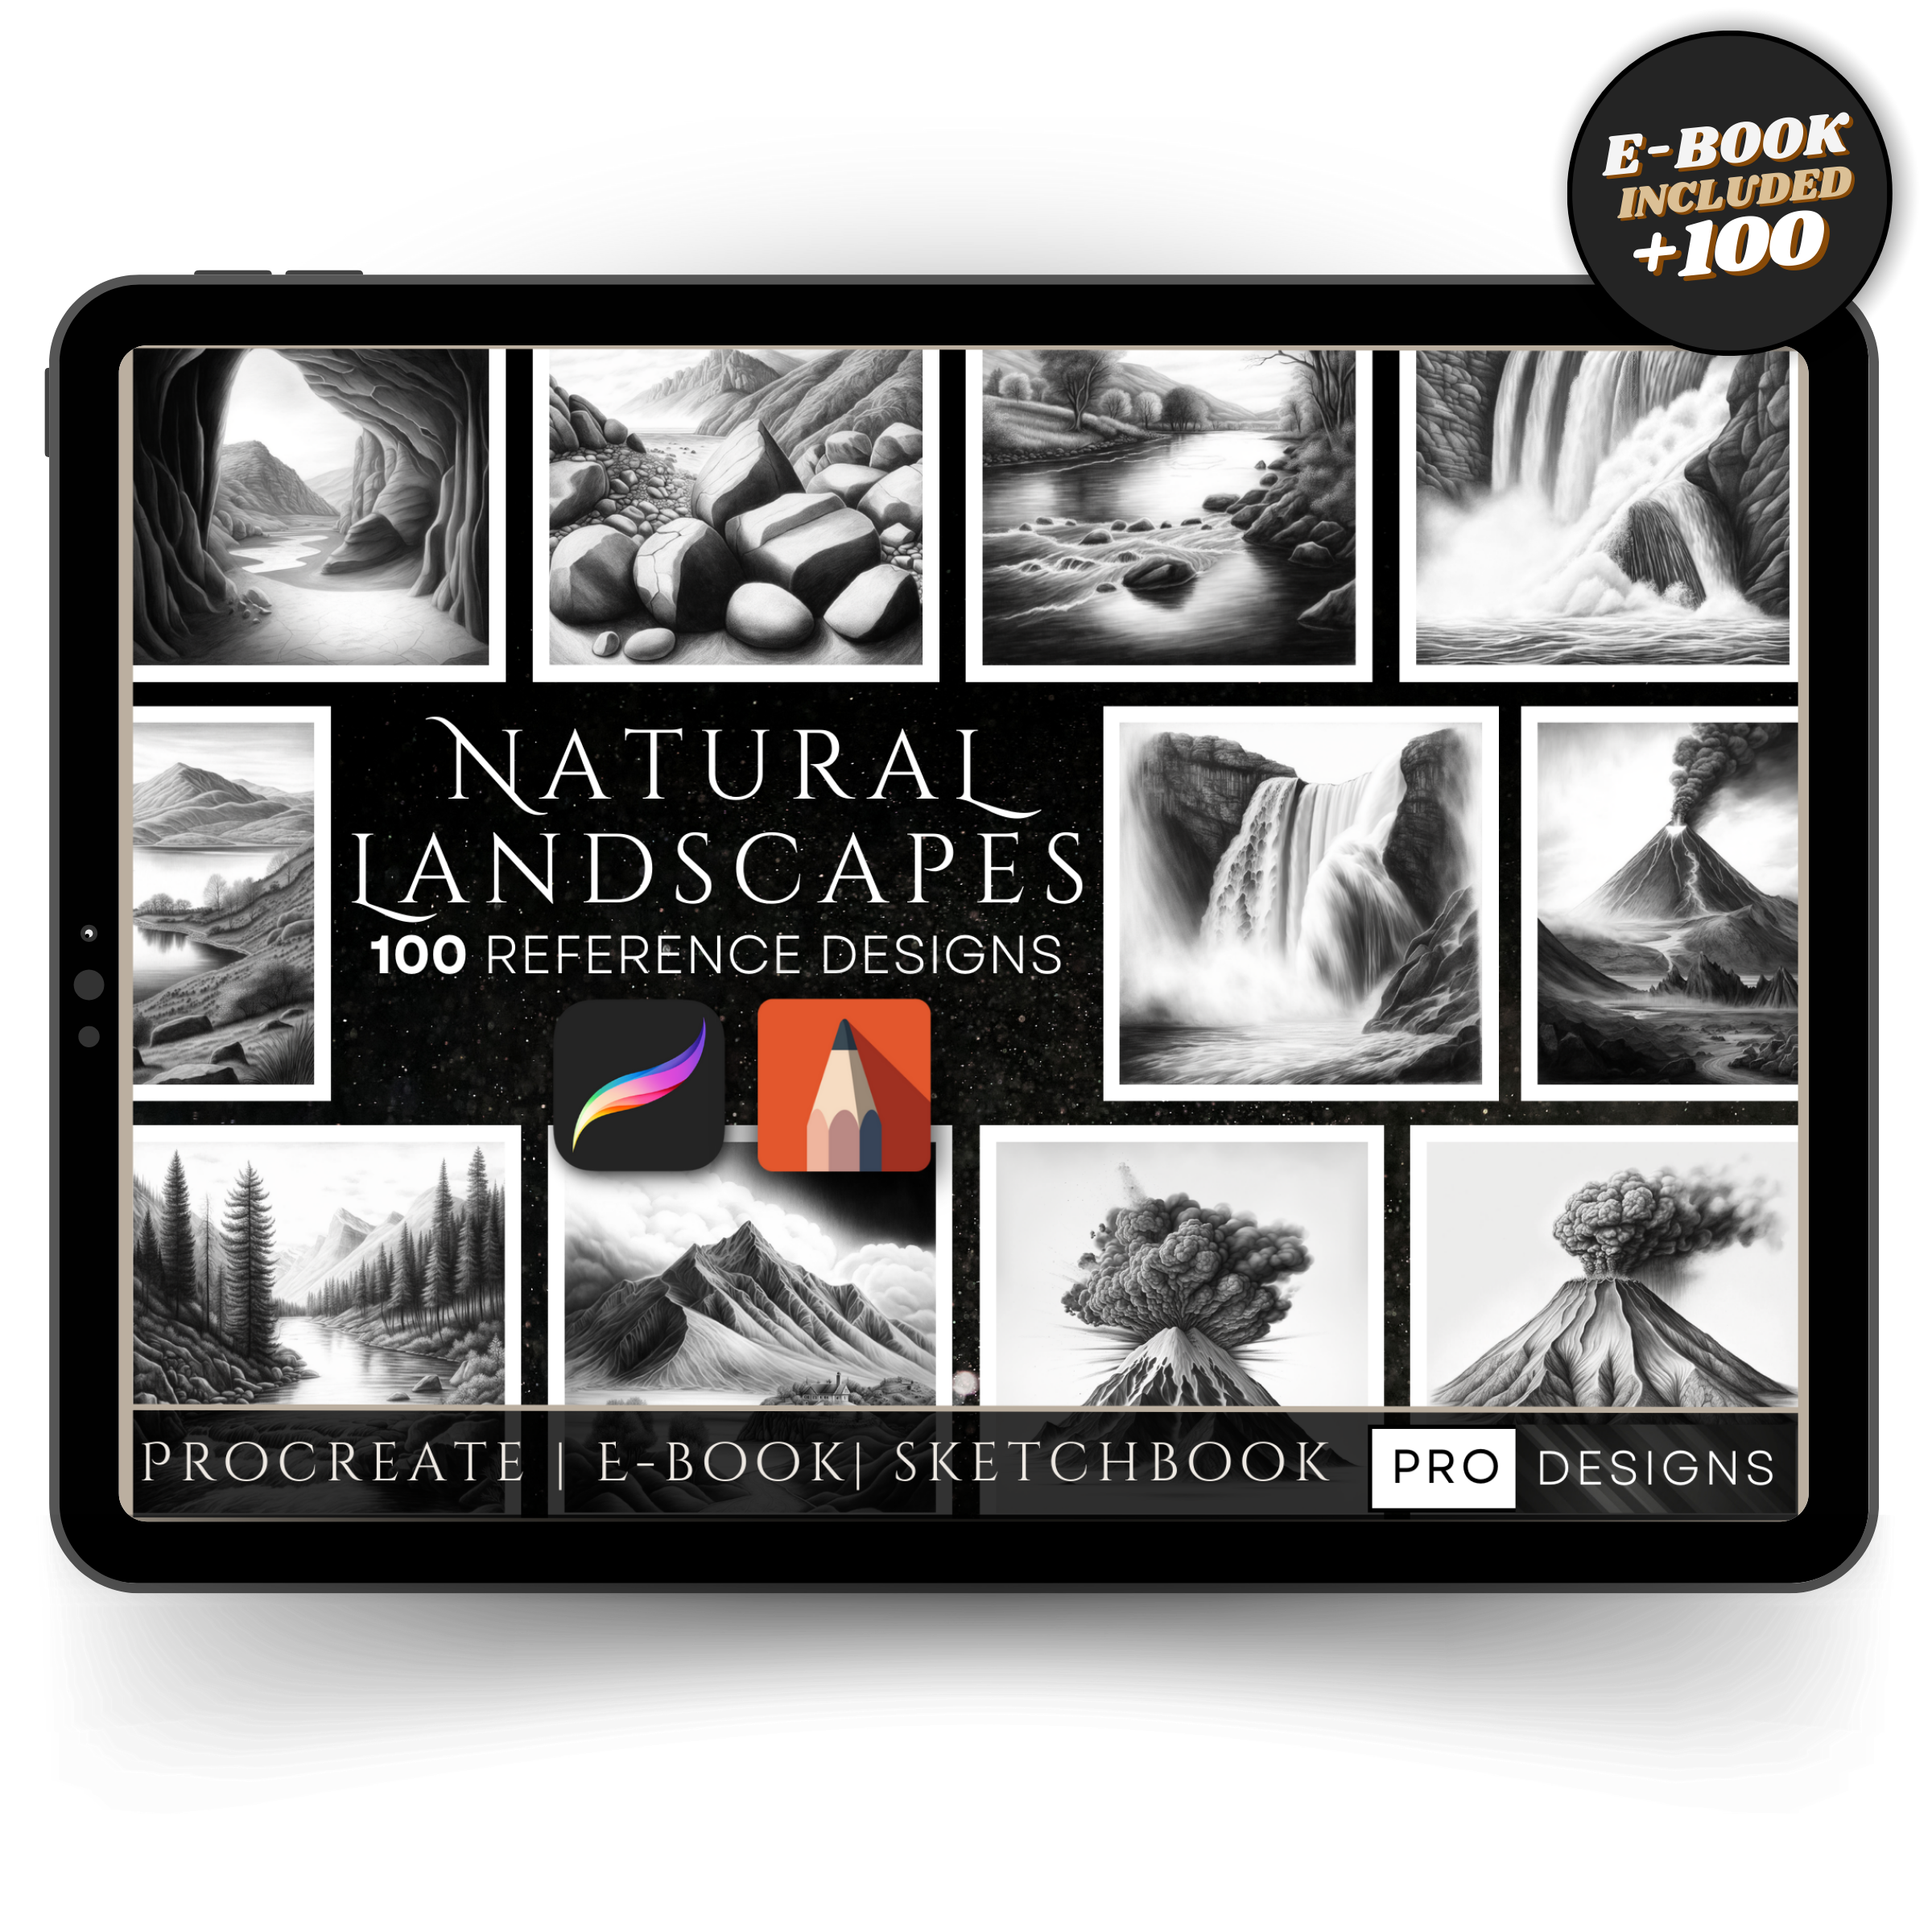 "Canvas of the Earth" - The Natural Landscapes Collection